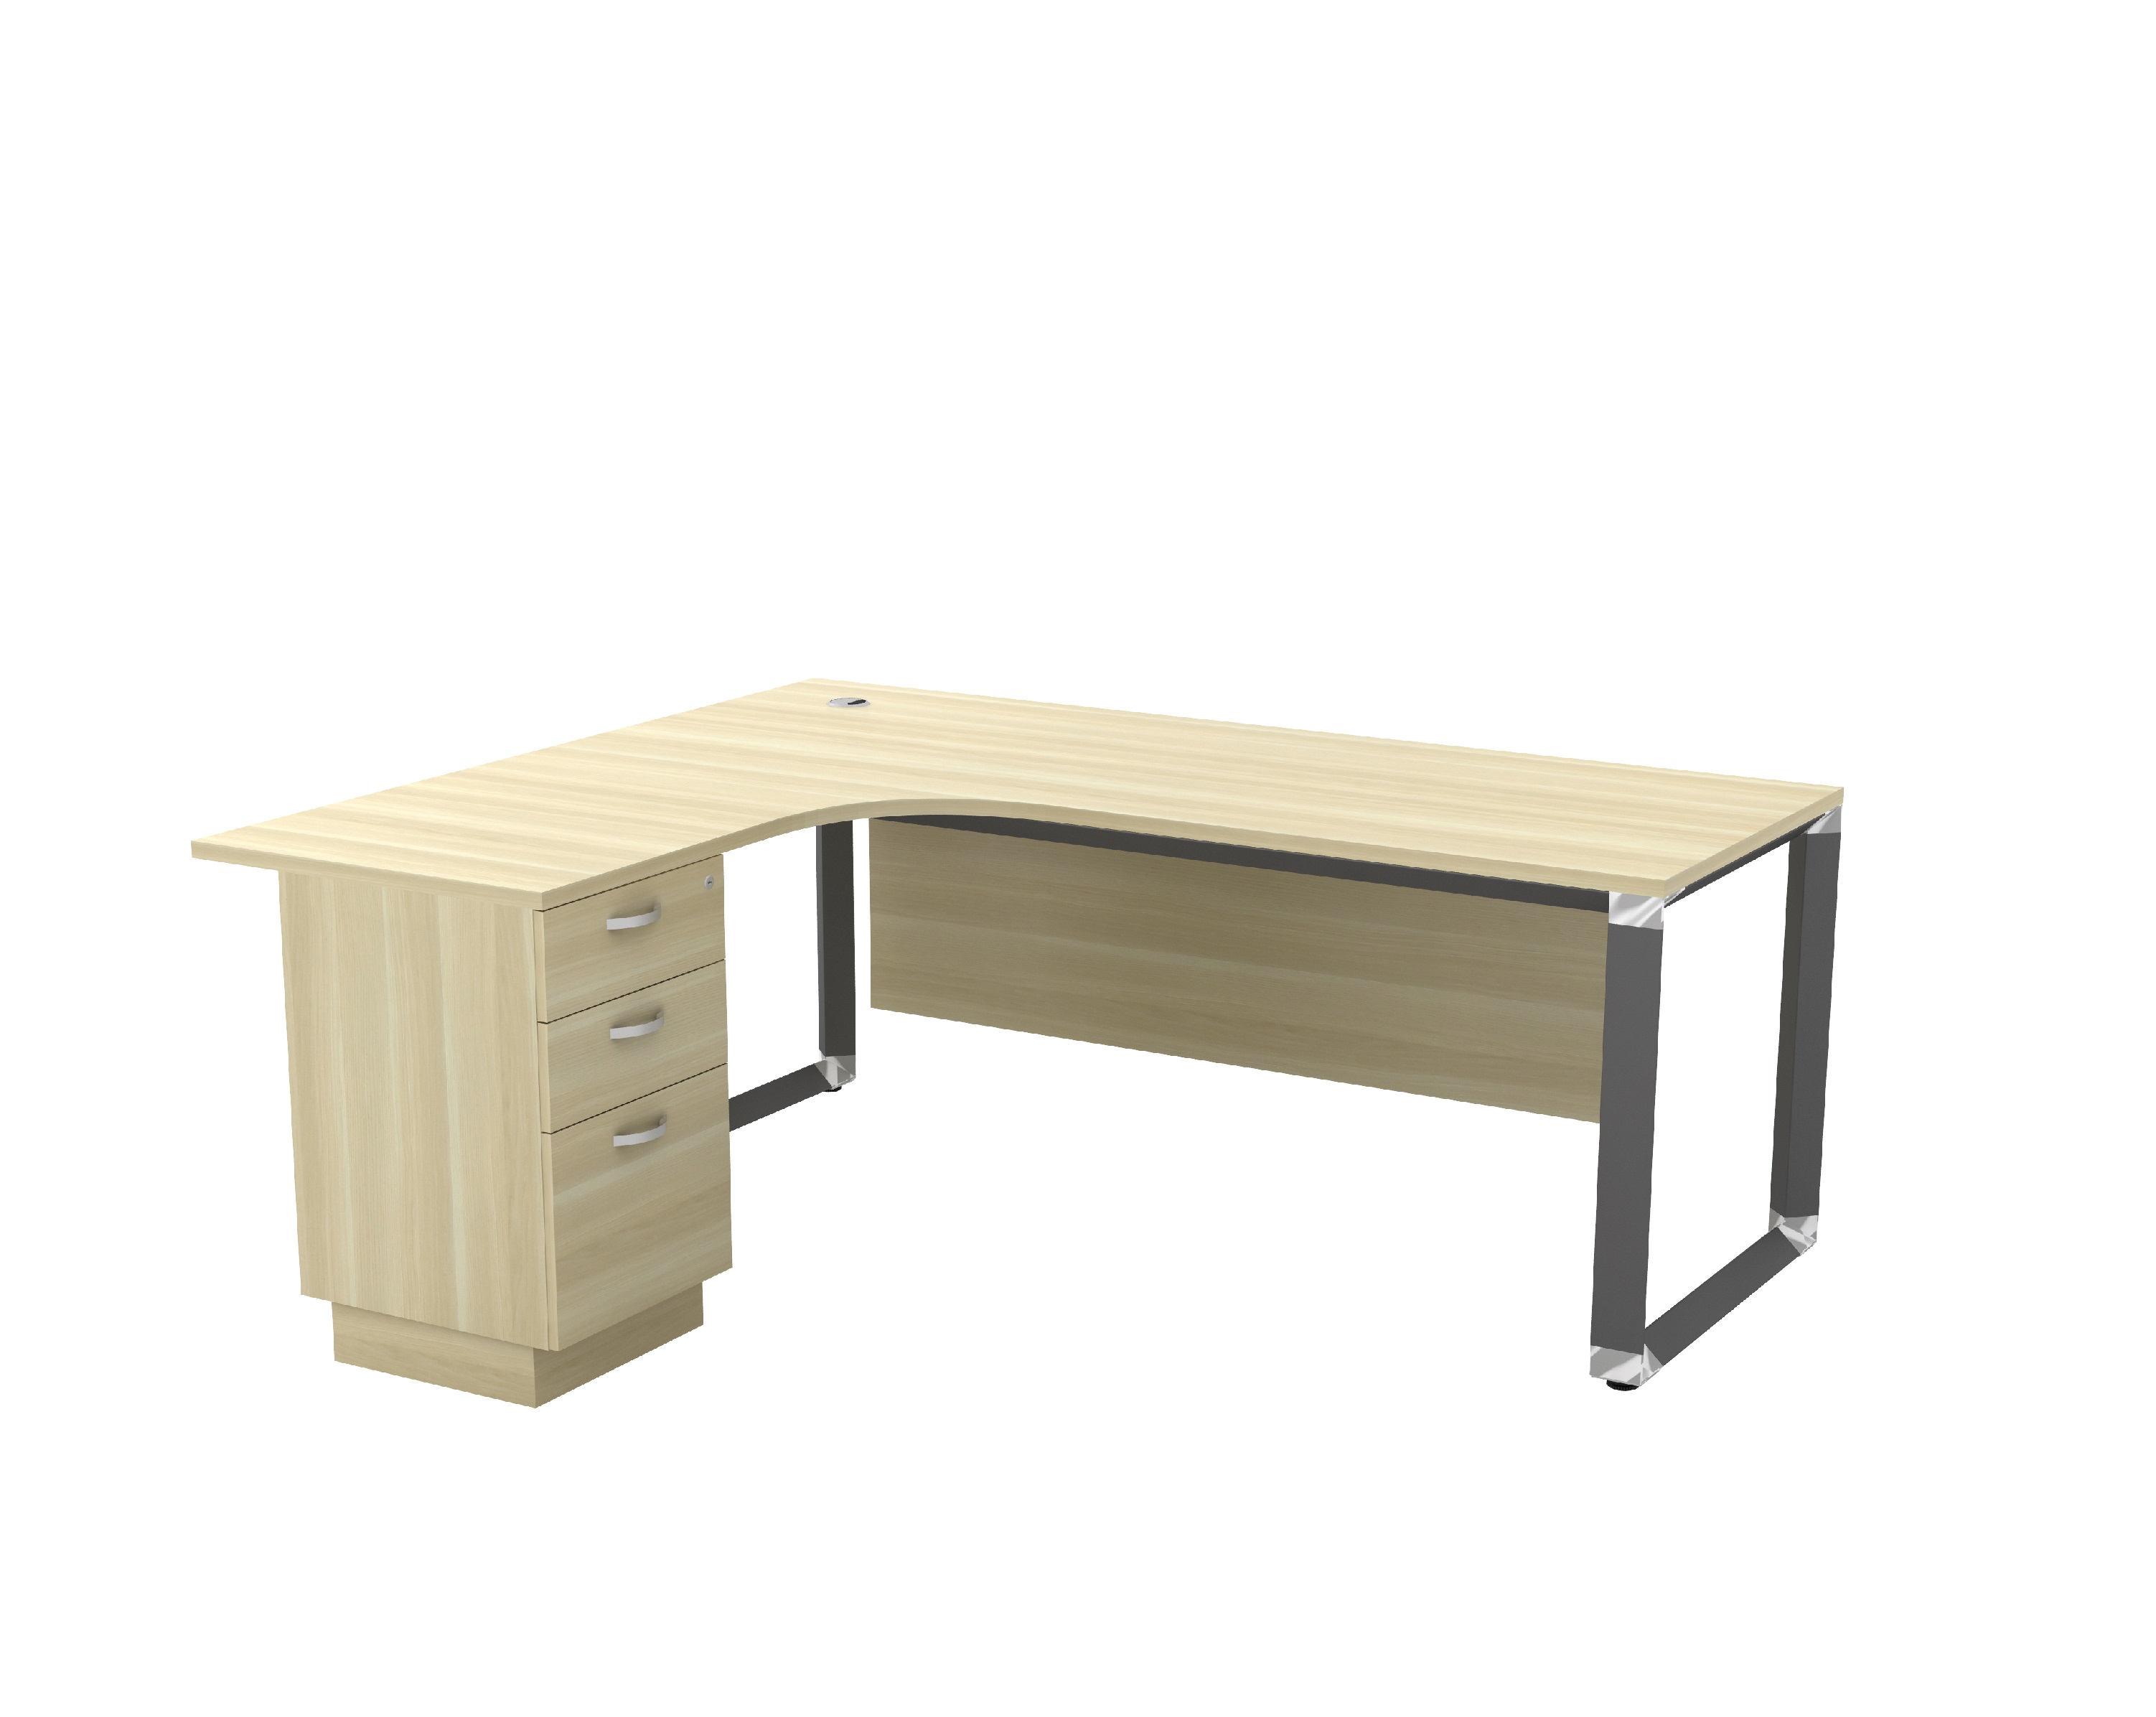 O-Series Table C/w Metal Front Panel